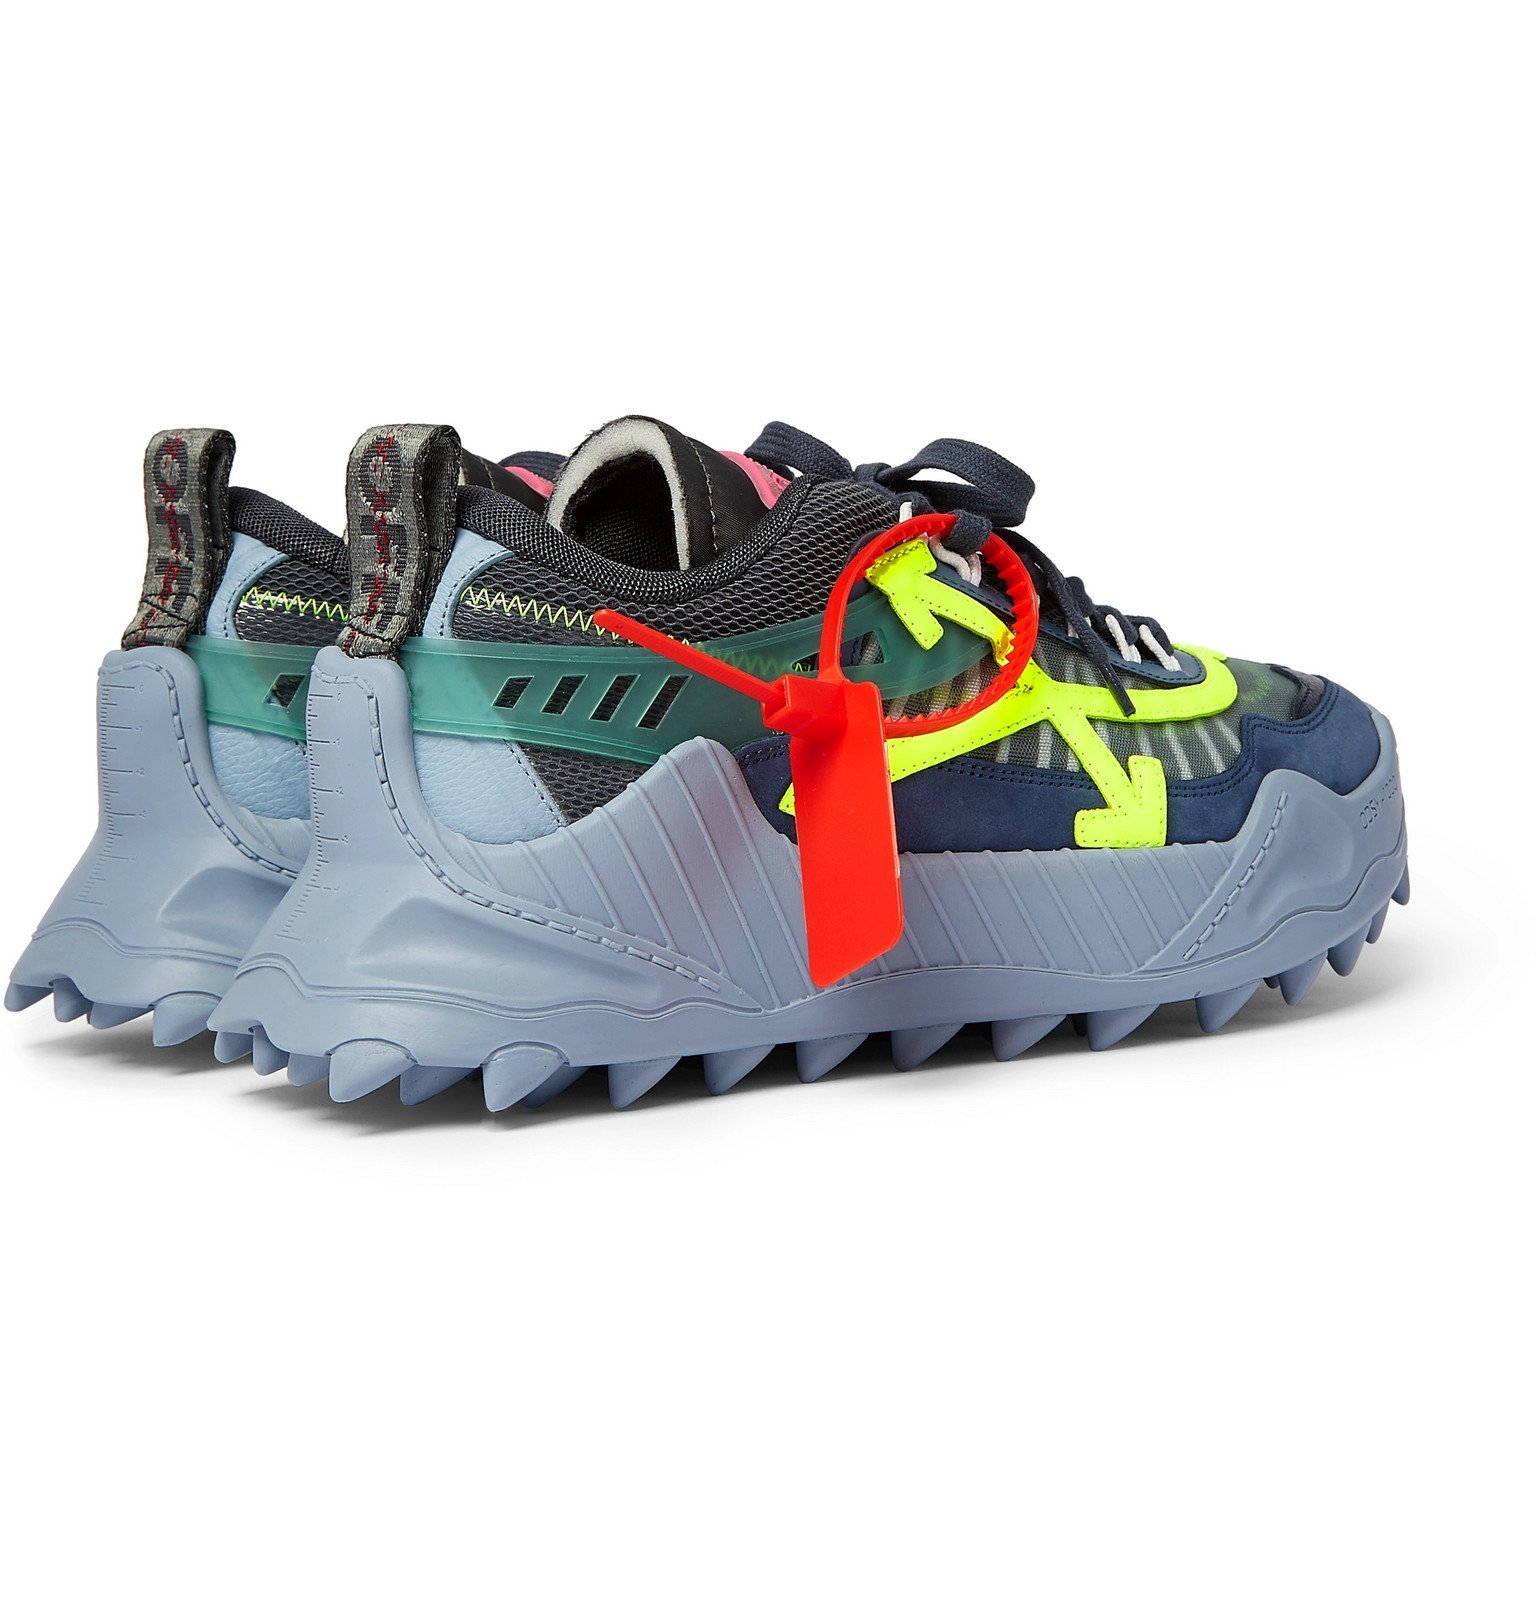 Off-White - Odsy-1000 Suede, Mesh, Leather and Rubber Sneakers - Blue ...